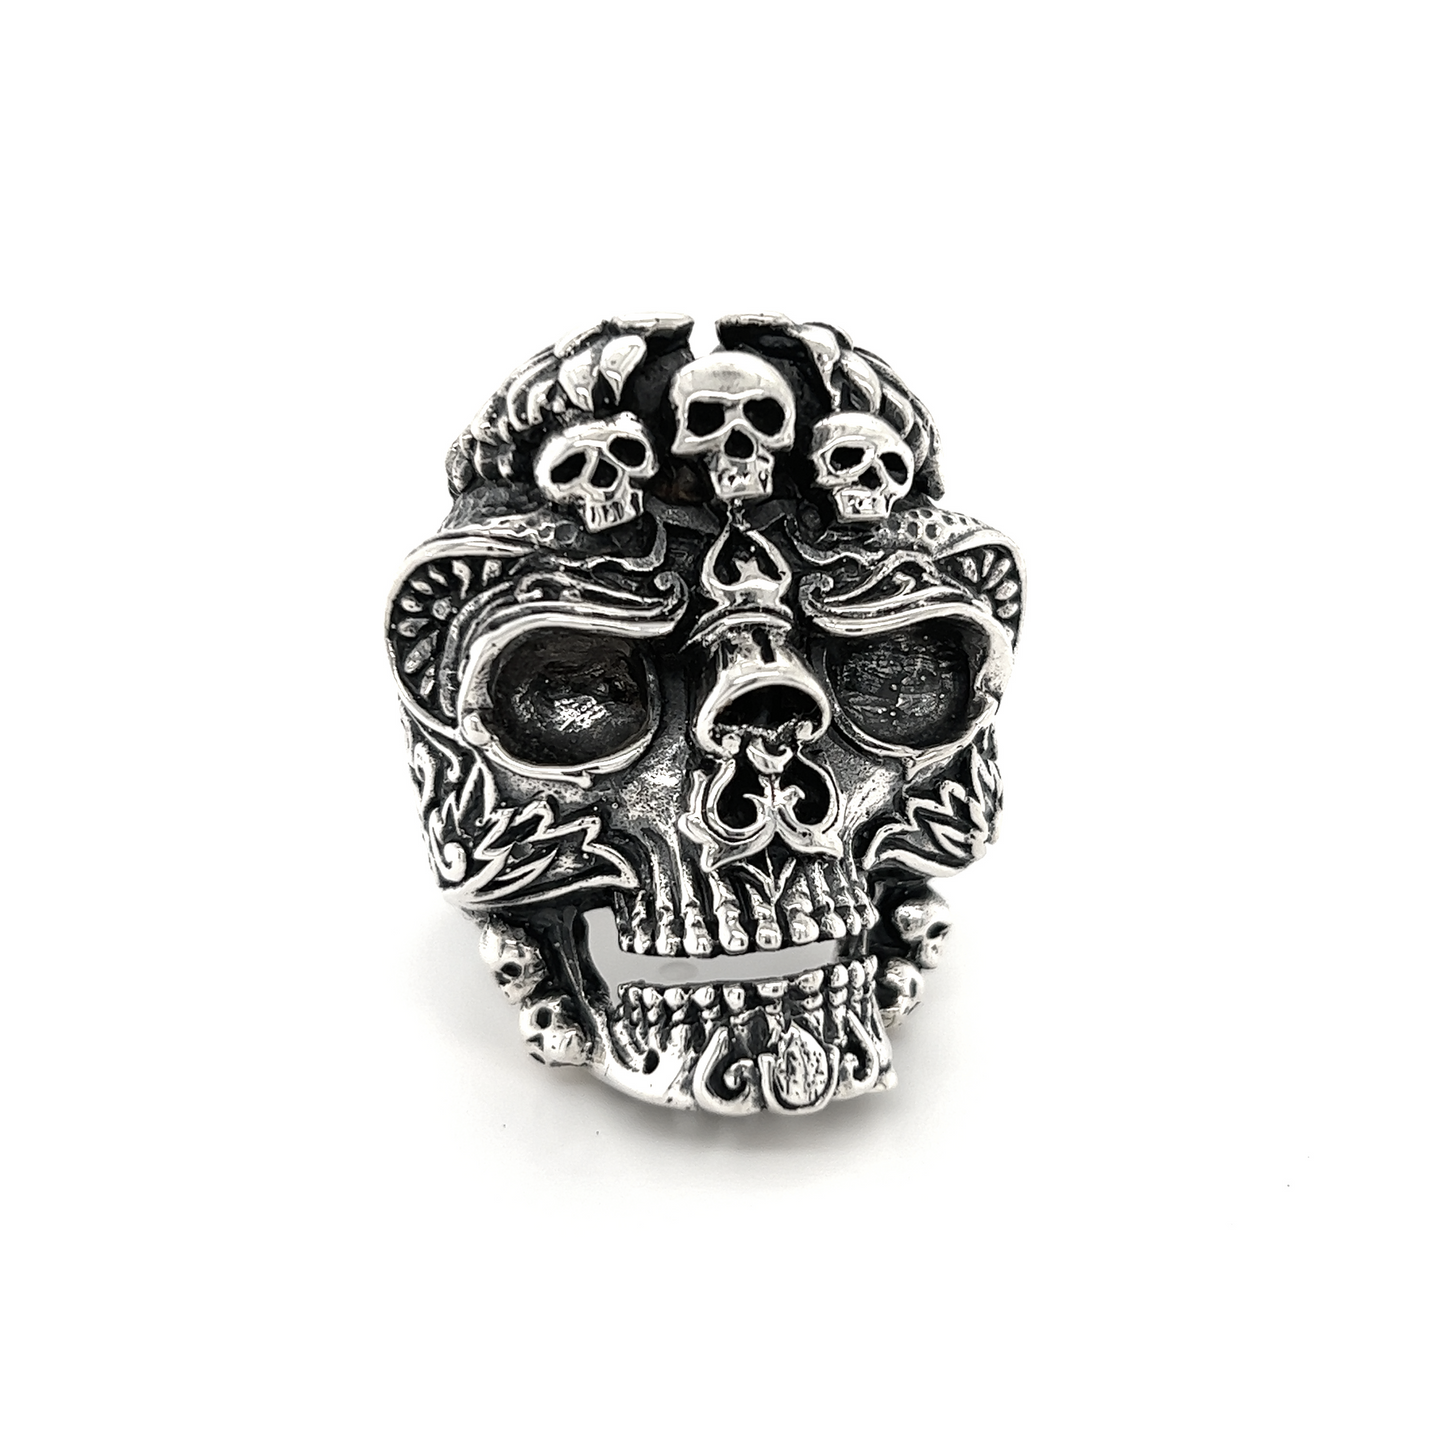 
                  
                    An Exquisite Skull Ring, a part of an exclusive jewelry line featuring intricately designed skulls.
                  
                